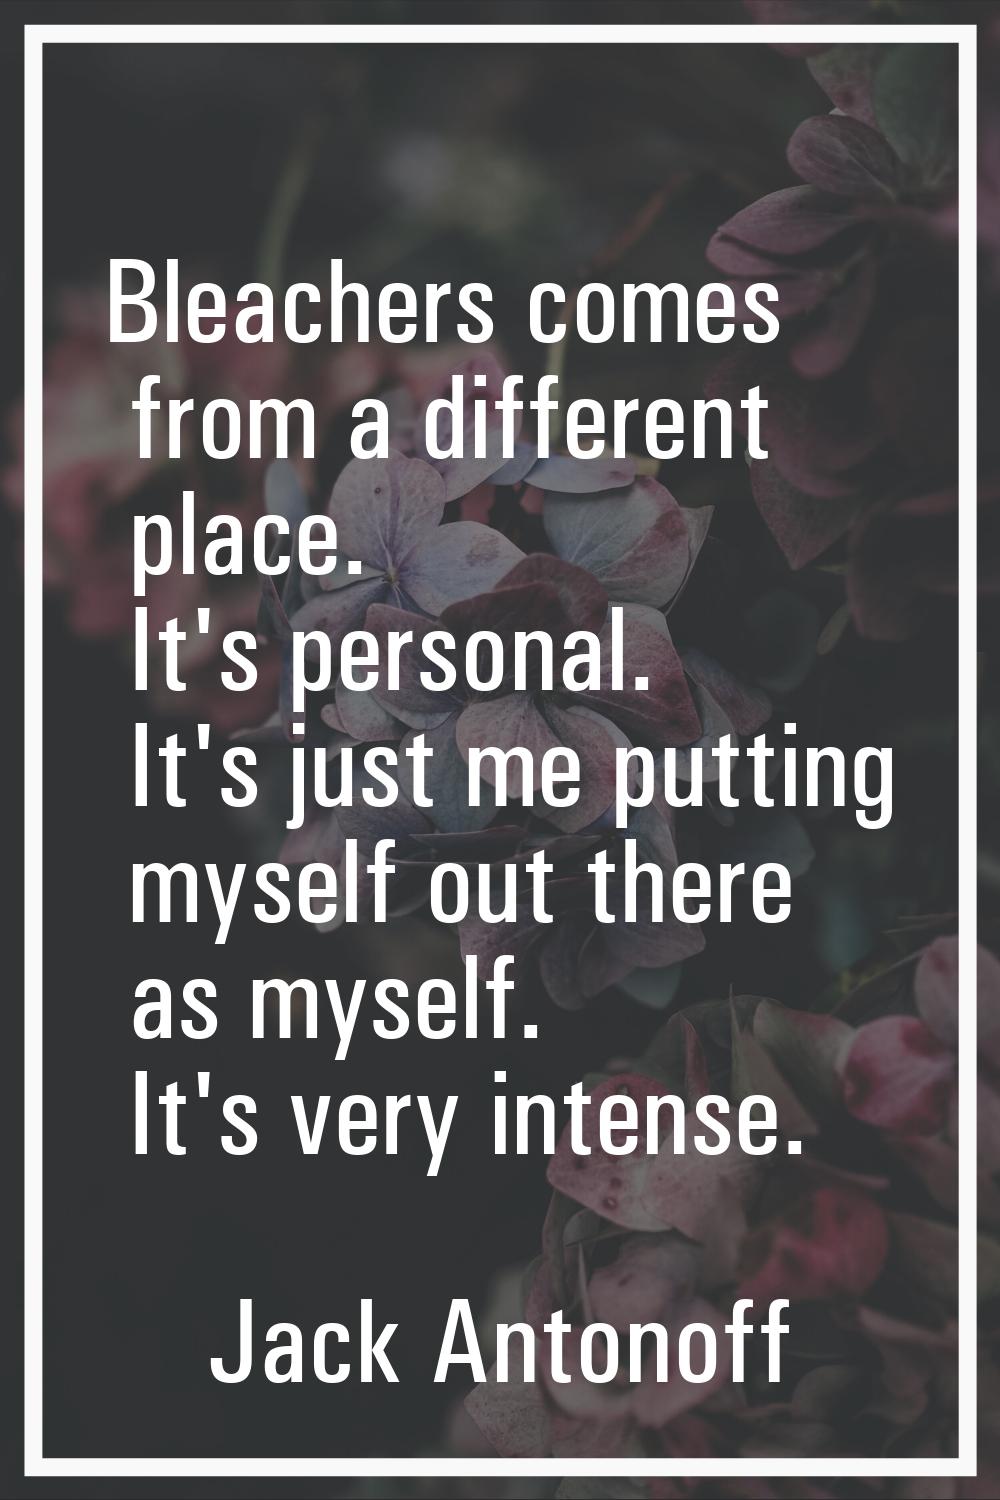 Bleachers comes from a different place. It's personal. It's just me putting myself out there as mys